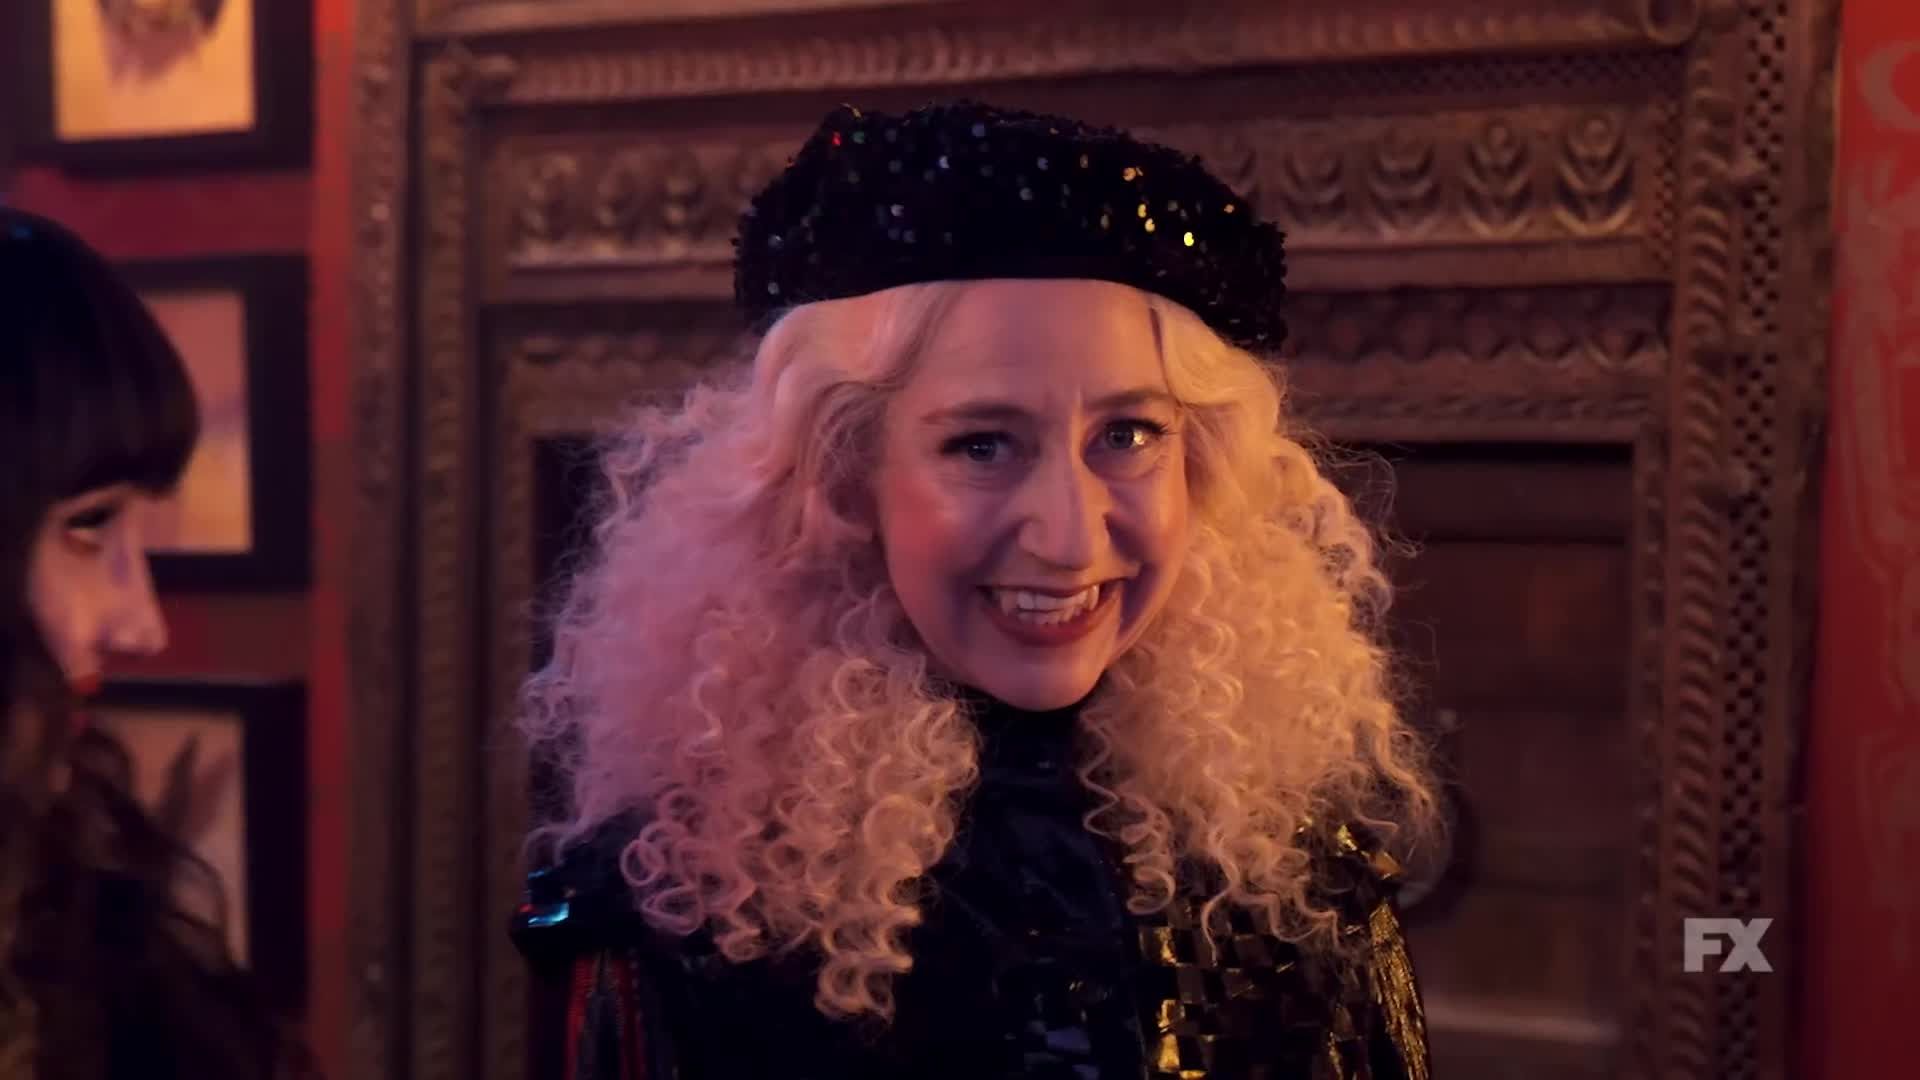 Nadja's Nightclub Opening Outfit From What We Do in the Shadows